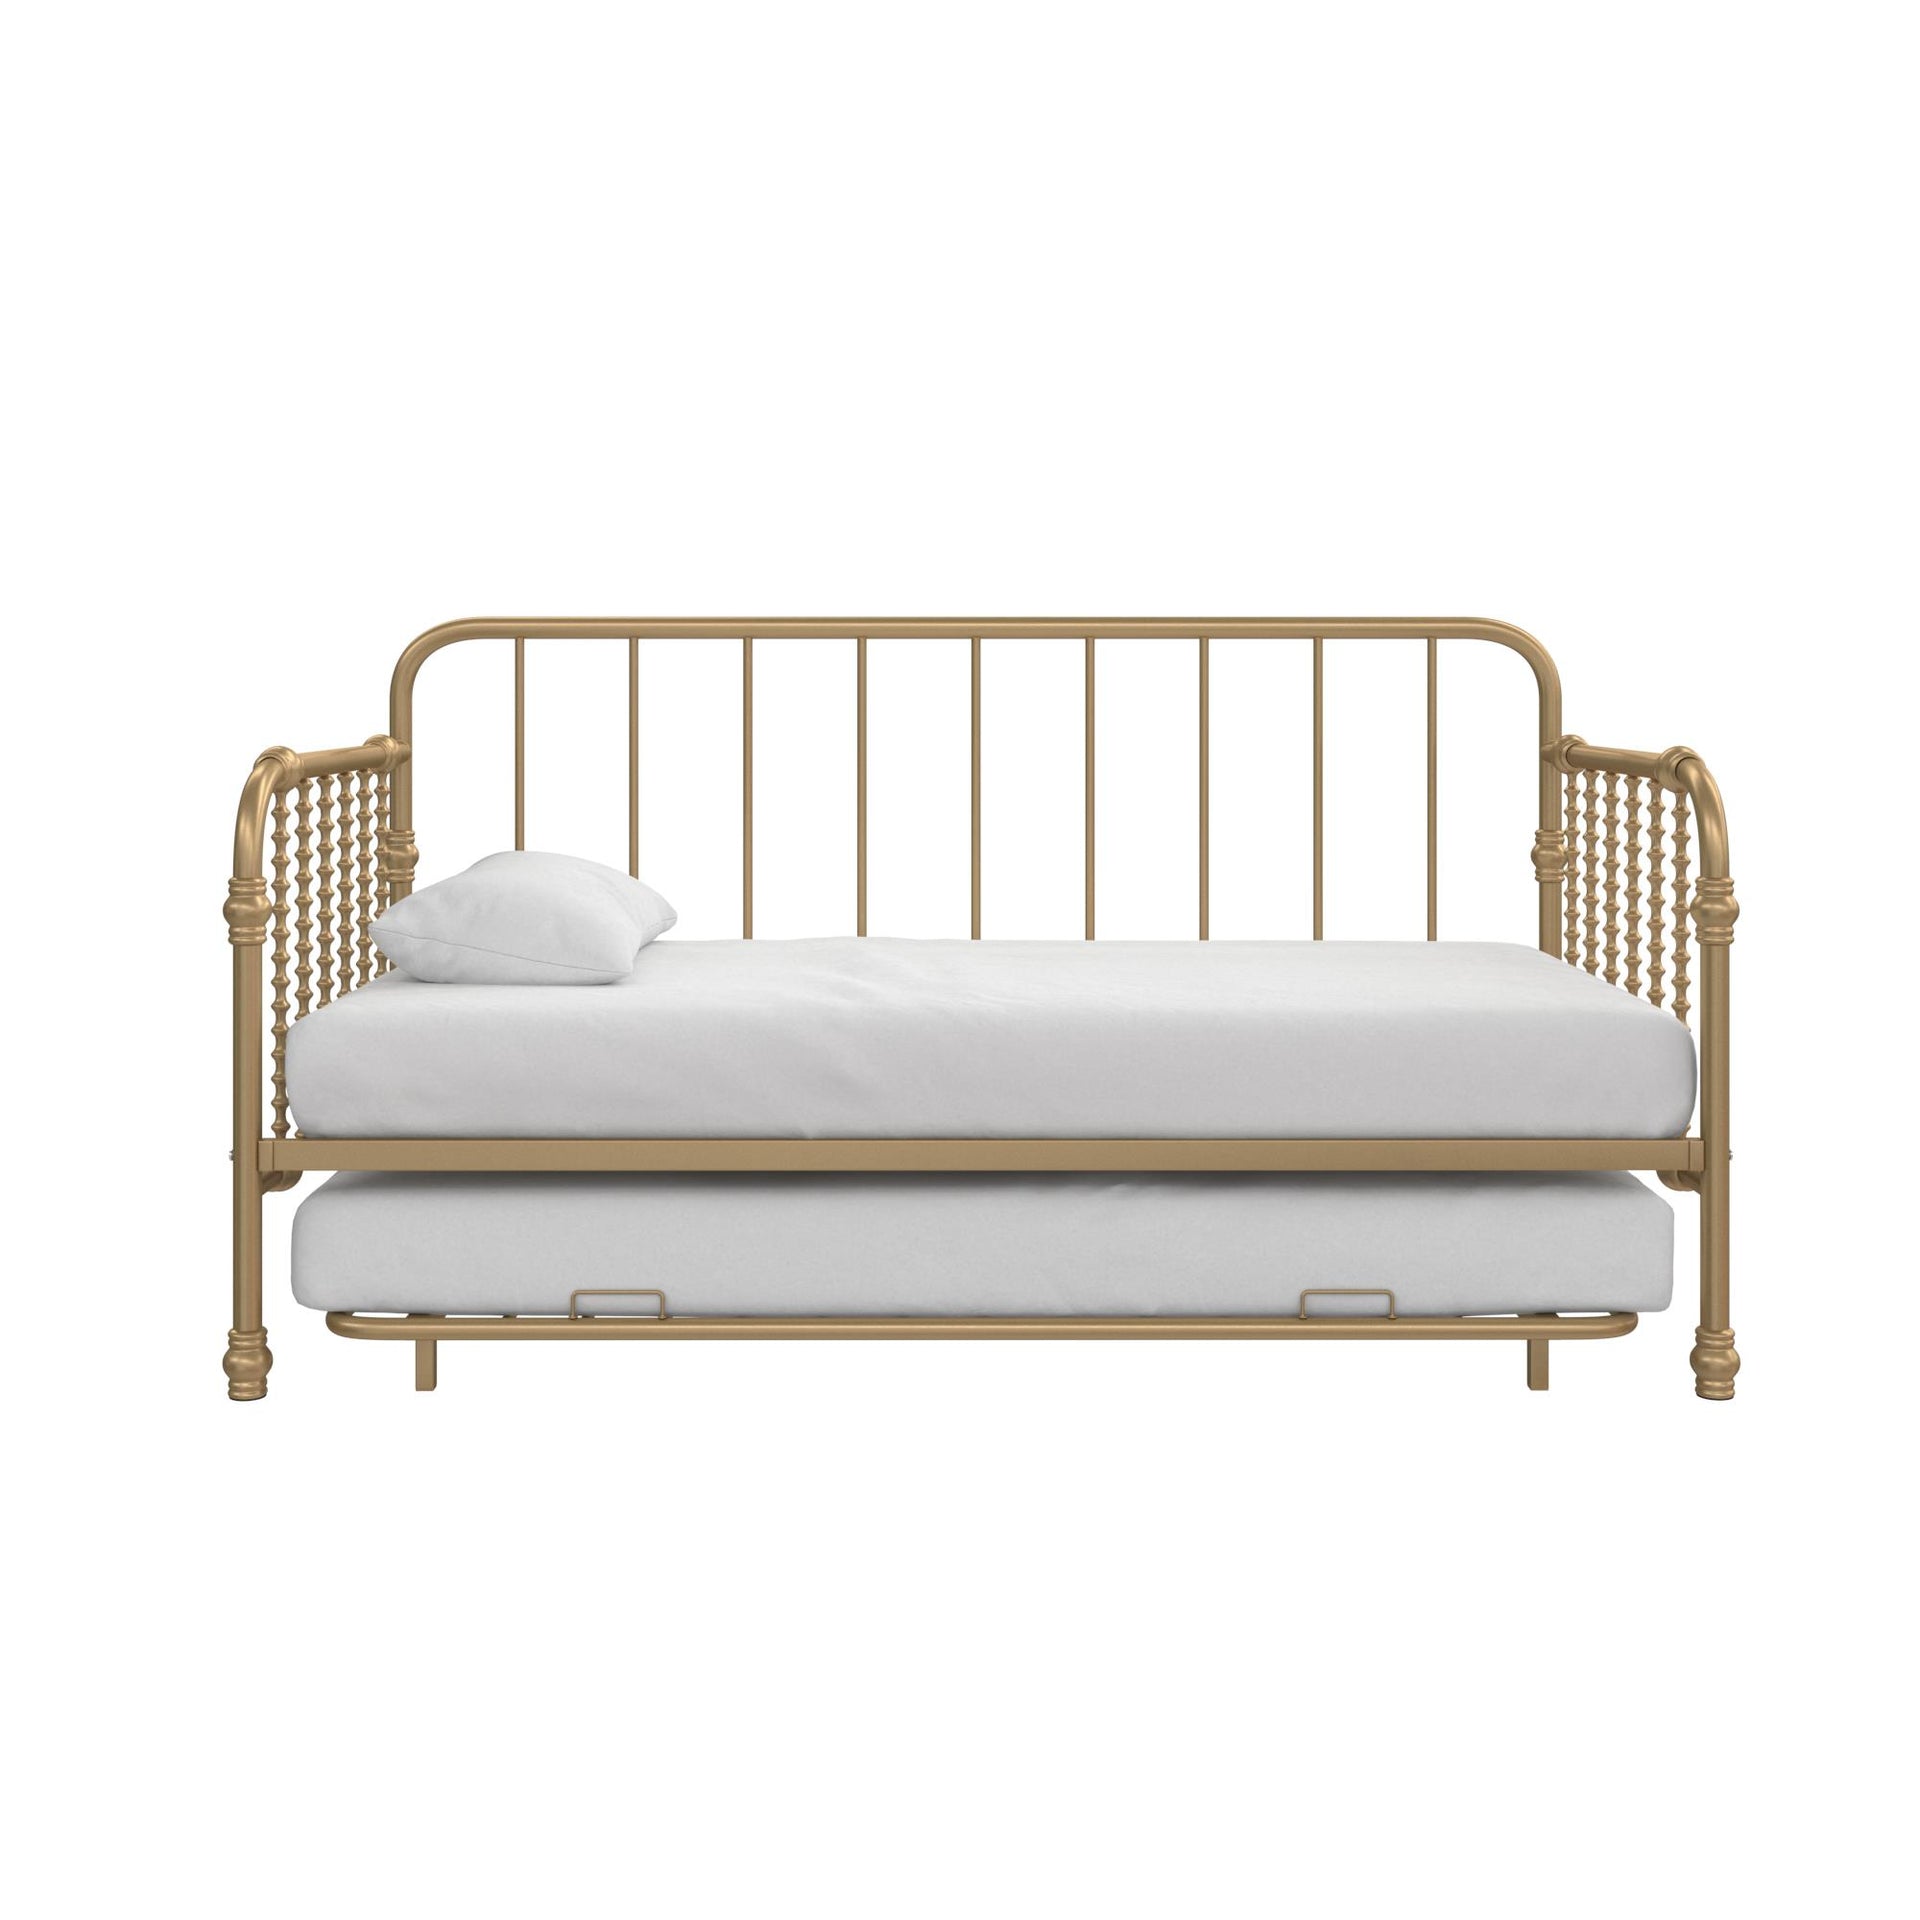 Little Seeds Monarch Hill Wren Metal Daybed with Trundle - Gold - Twin